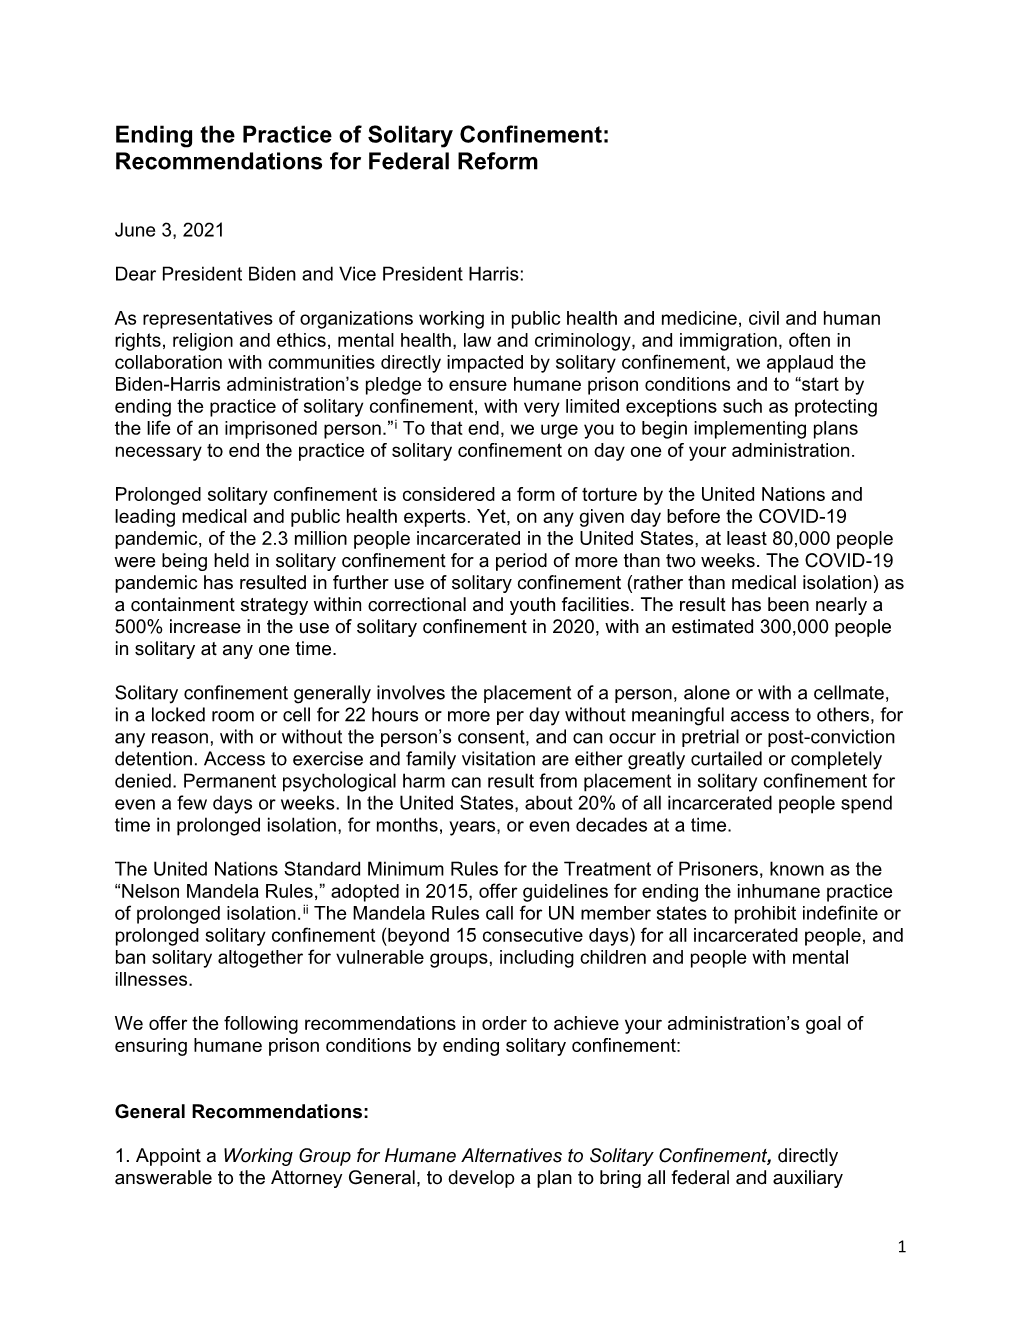 Ending the Practice of Solitary Confinement: Recommendations for Federal Reform